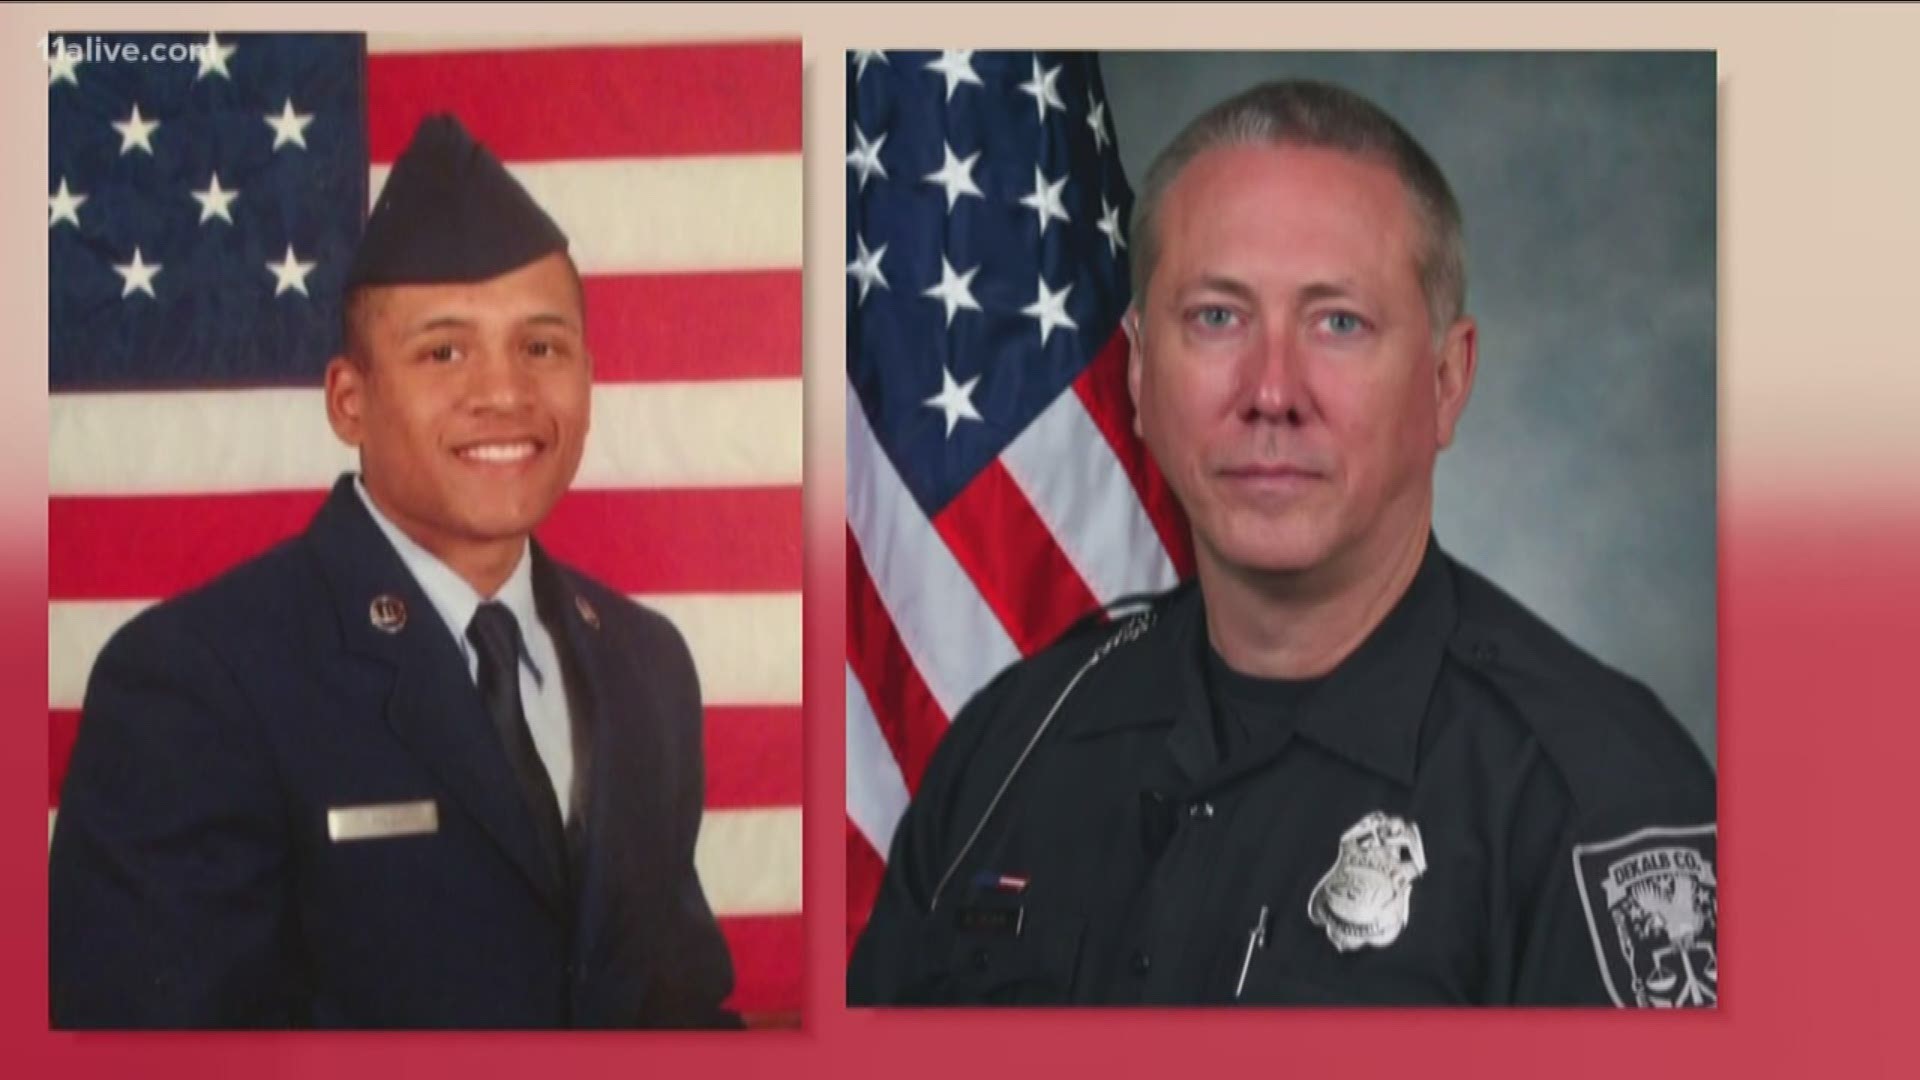 Jury selection begins Monday for the trial of the ex DeKalb County Police officer accused of murdering Anthony Hill.